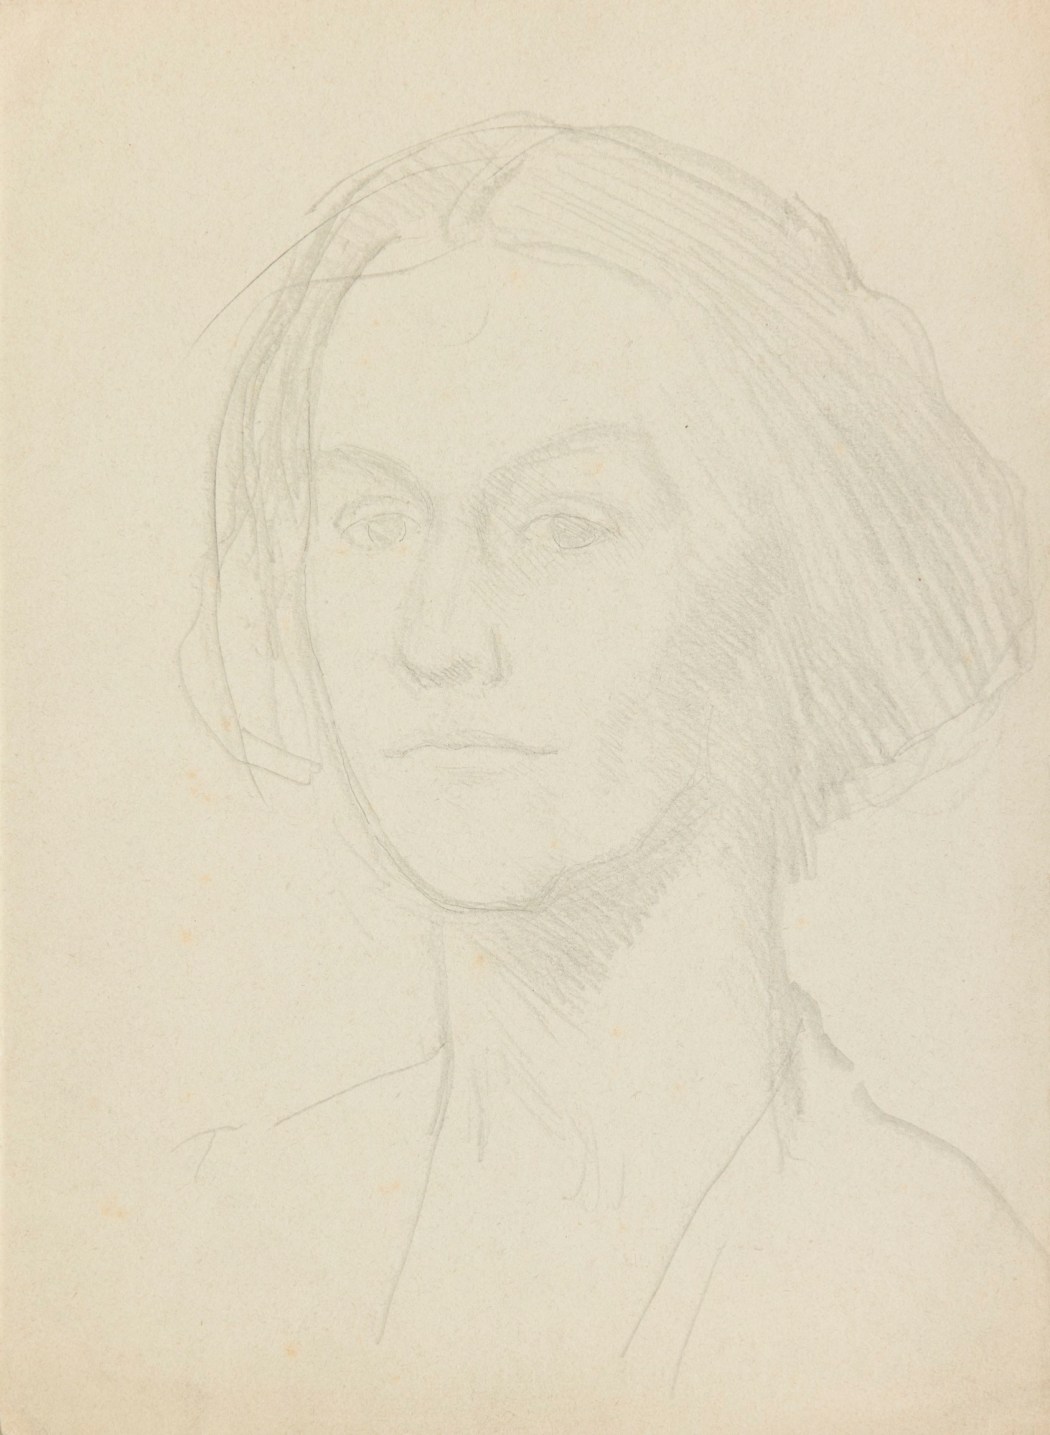 Sketch of the head of a young woman, possibly one of the daughters of Sarah  Siddons | Lawrence, Thomas Sir, PRA | V&A Explore The Collections